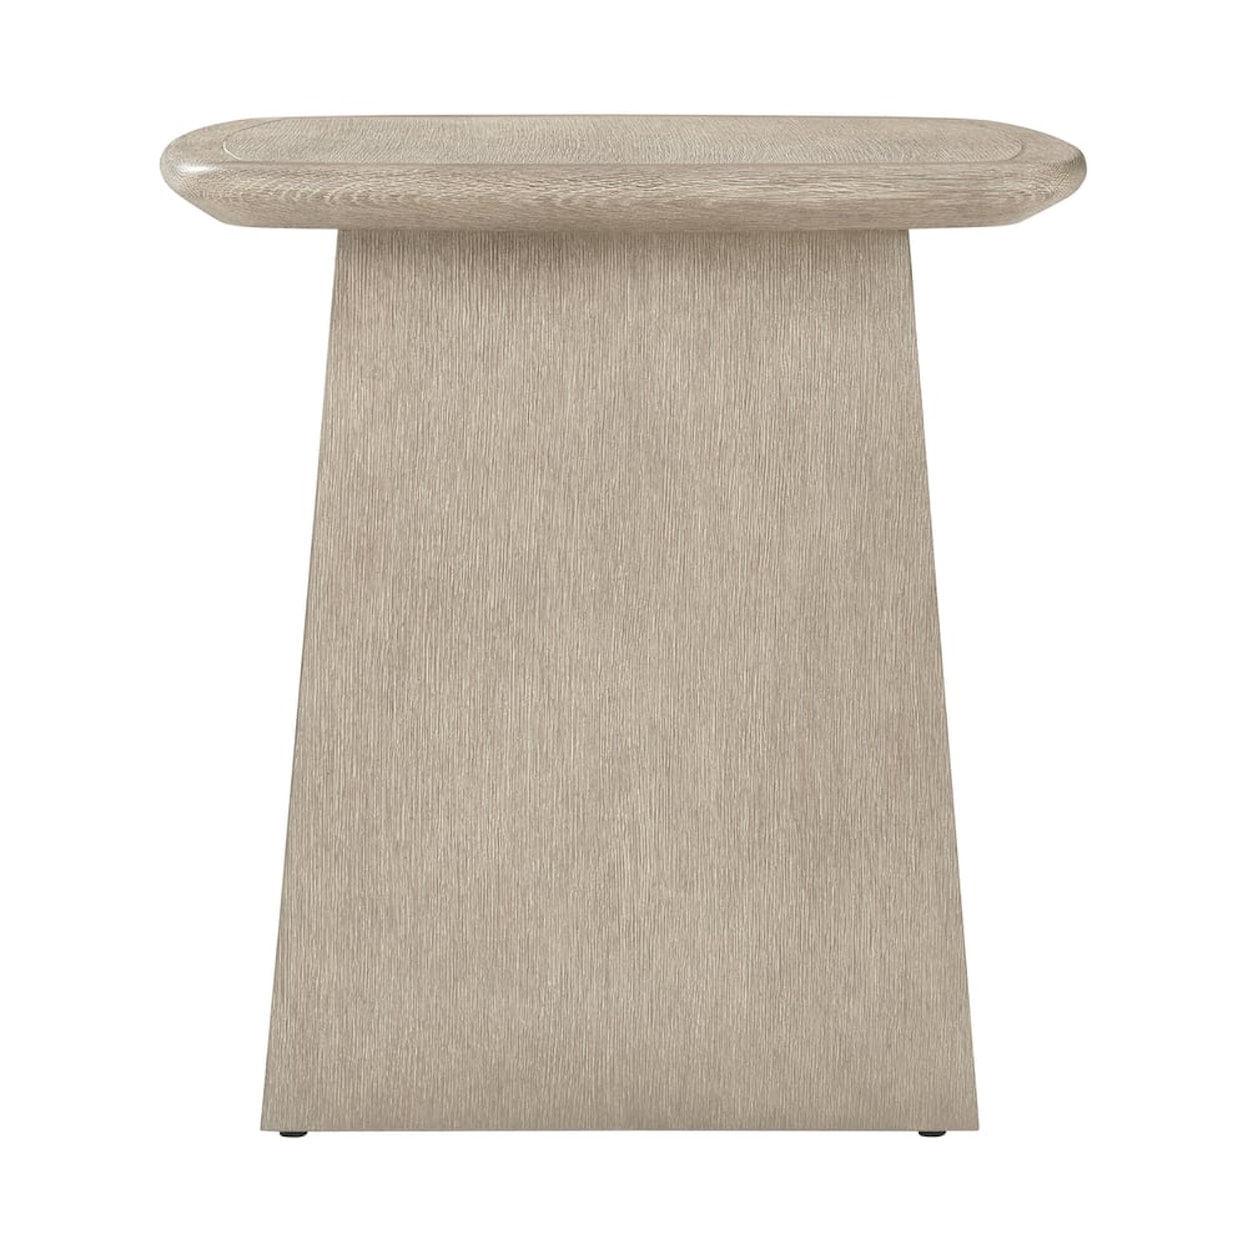 Theodore Alexander Repose End Tables